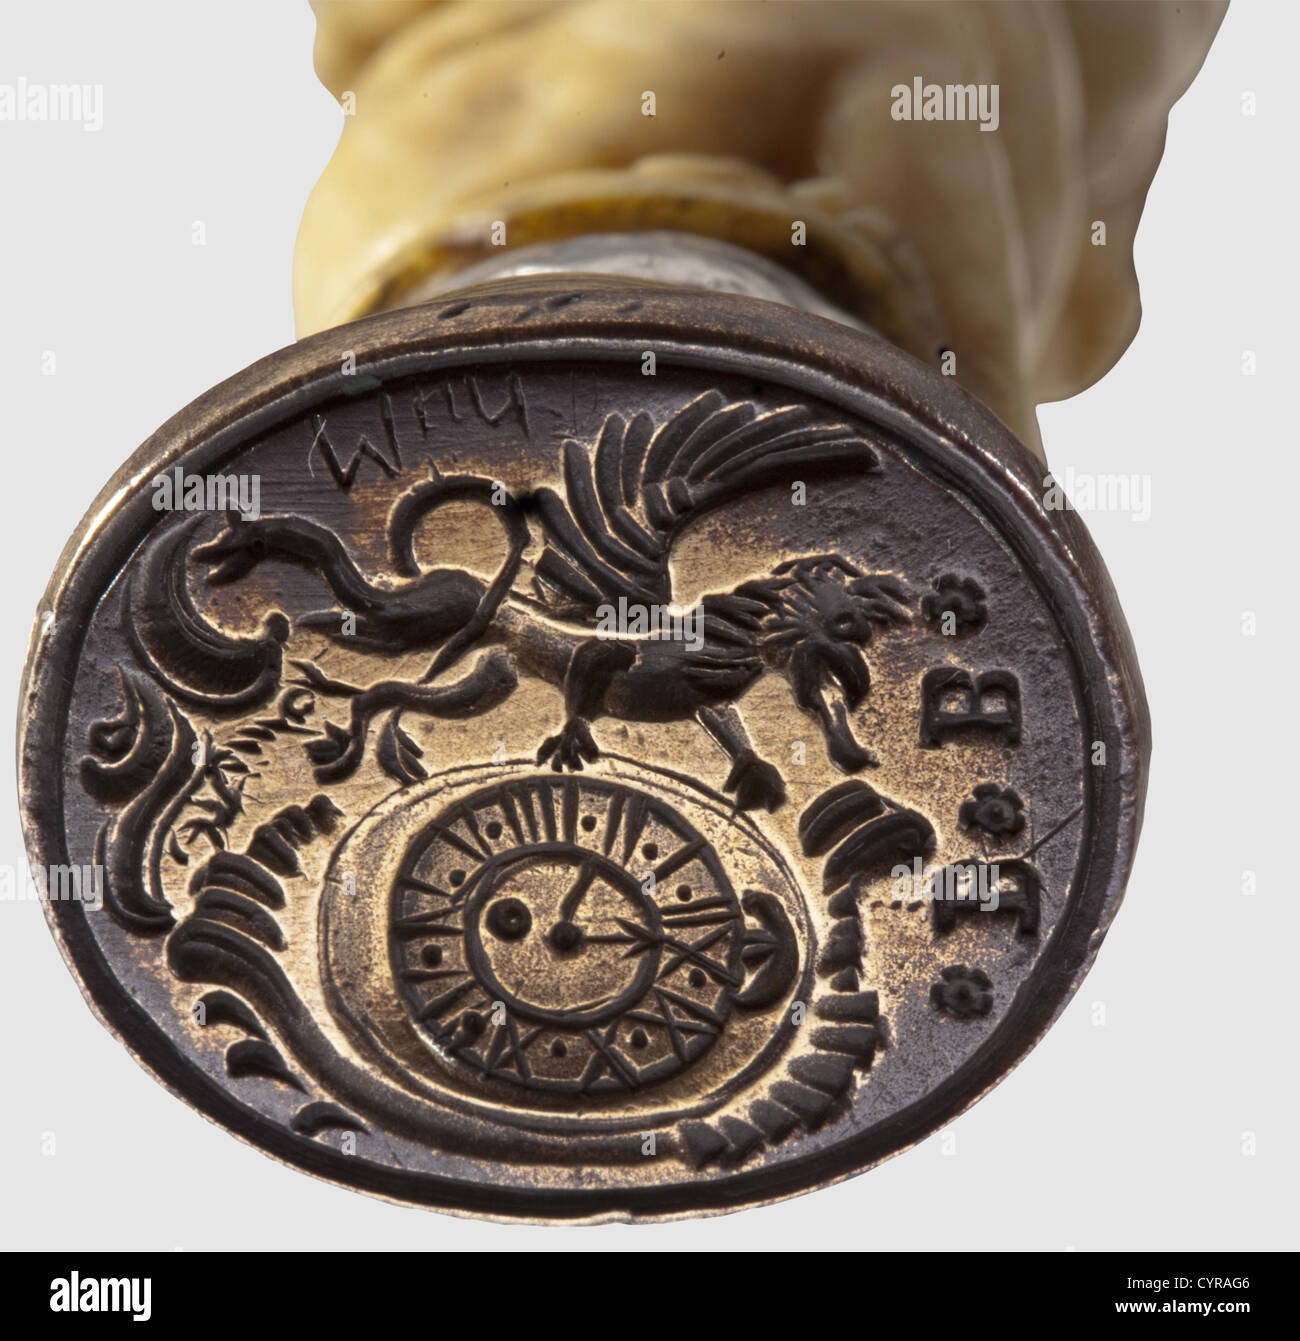 A German watchmaker's seal, 19th century Brass seal face bearing a rampant lion next to a watch dial beneath the monogram 'BB'. Finely carved ivory shaft with three intertwined cherubs and a ball finial. Height 10 cm, historic, historical, 19th century, handicrafts, handcraft, craft, object, objects, stills, clipping, clippings, cut out, cut-out, cut-outs, fine arts, art, artful, Additional-Rights-Clearences-Not Available Stock Photo